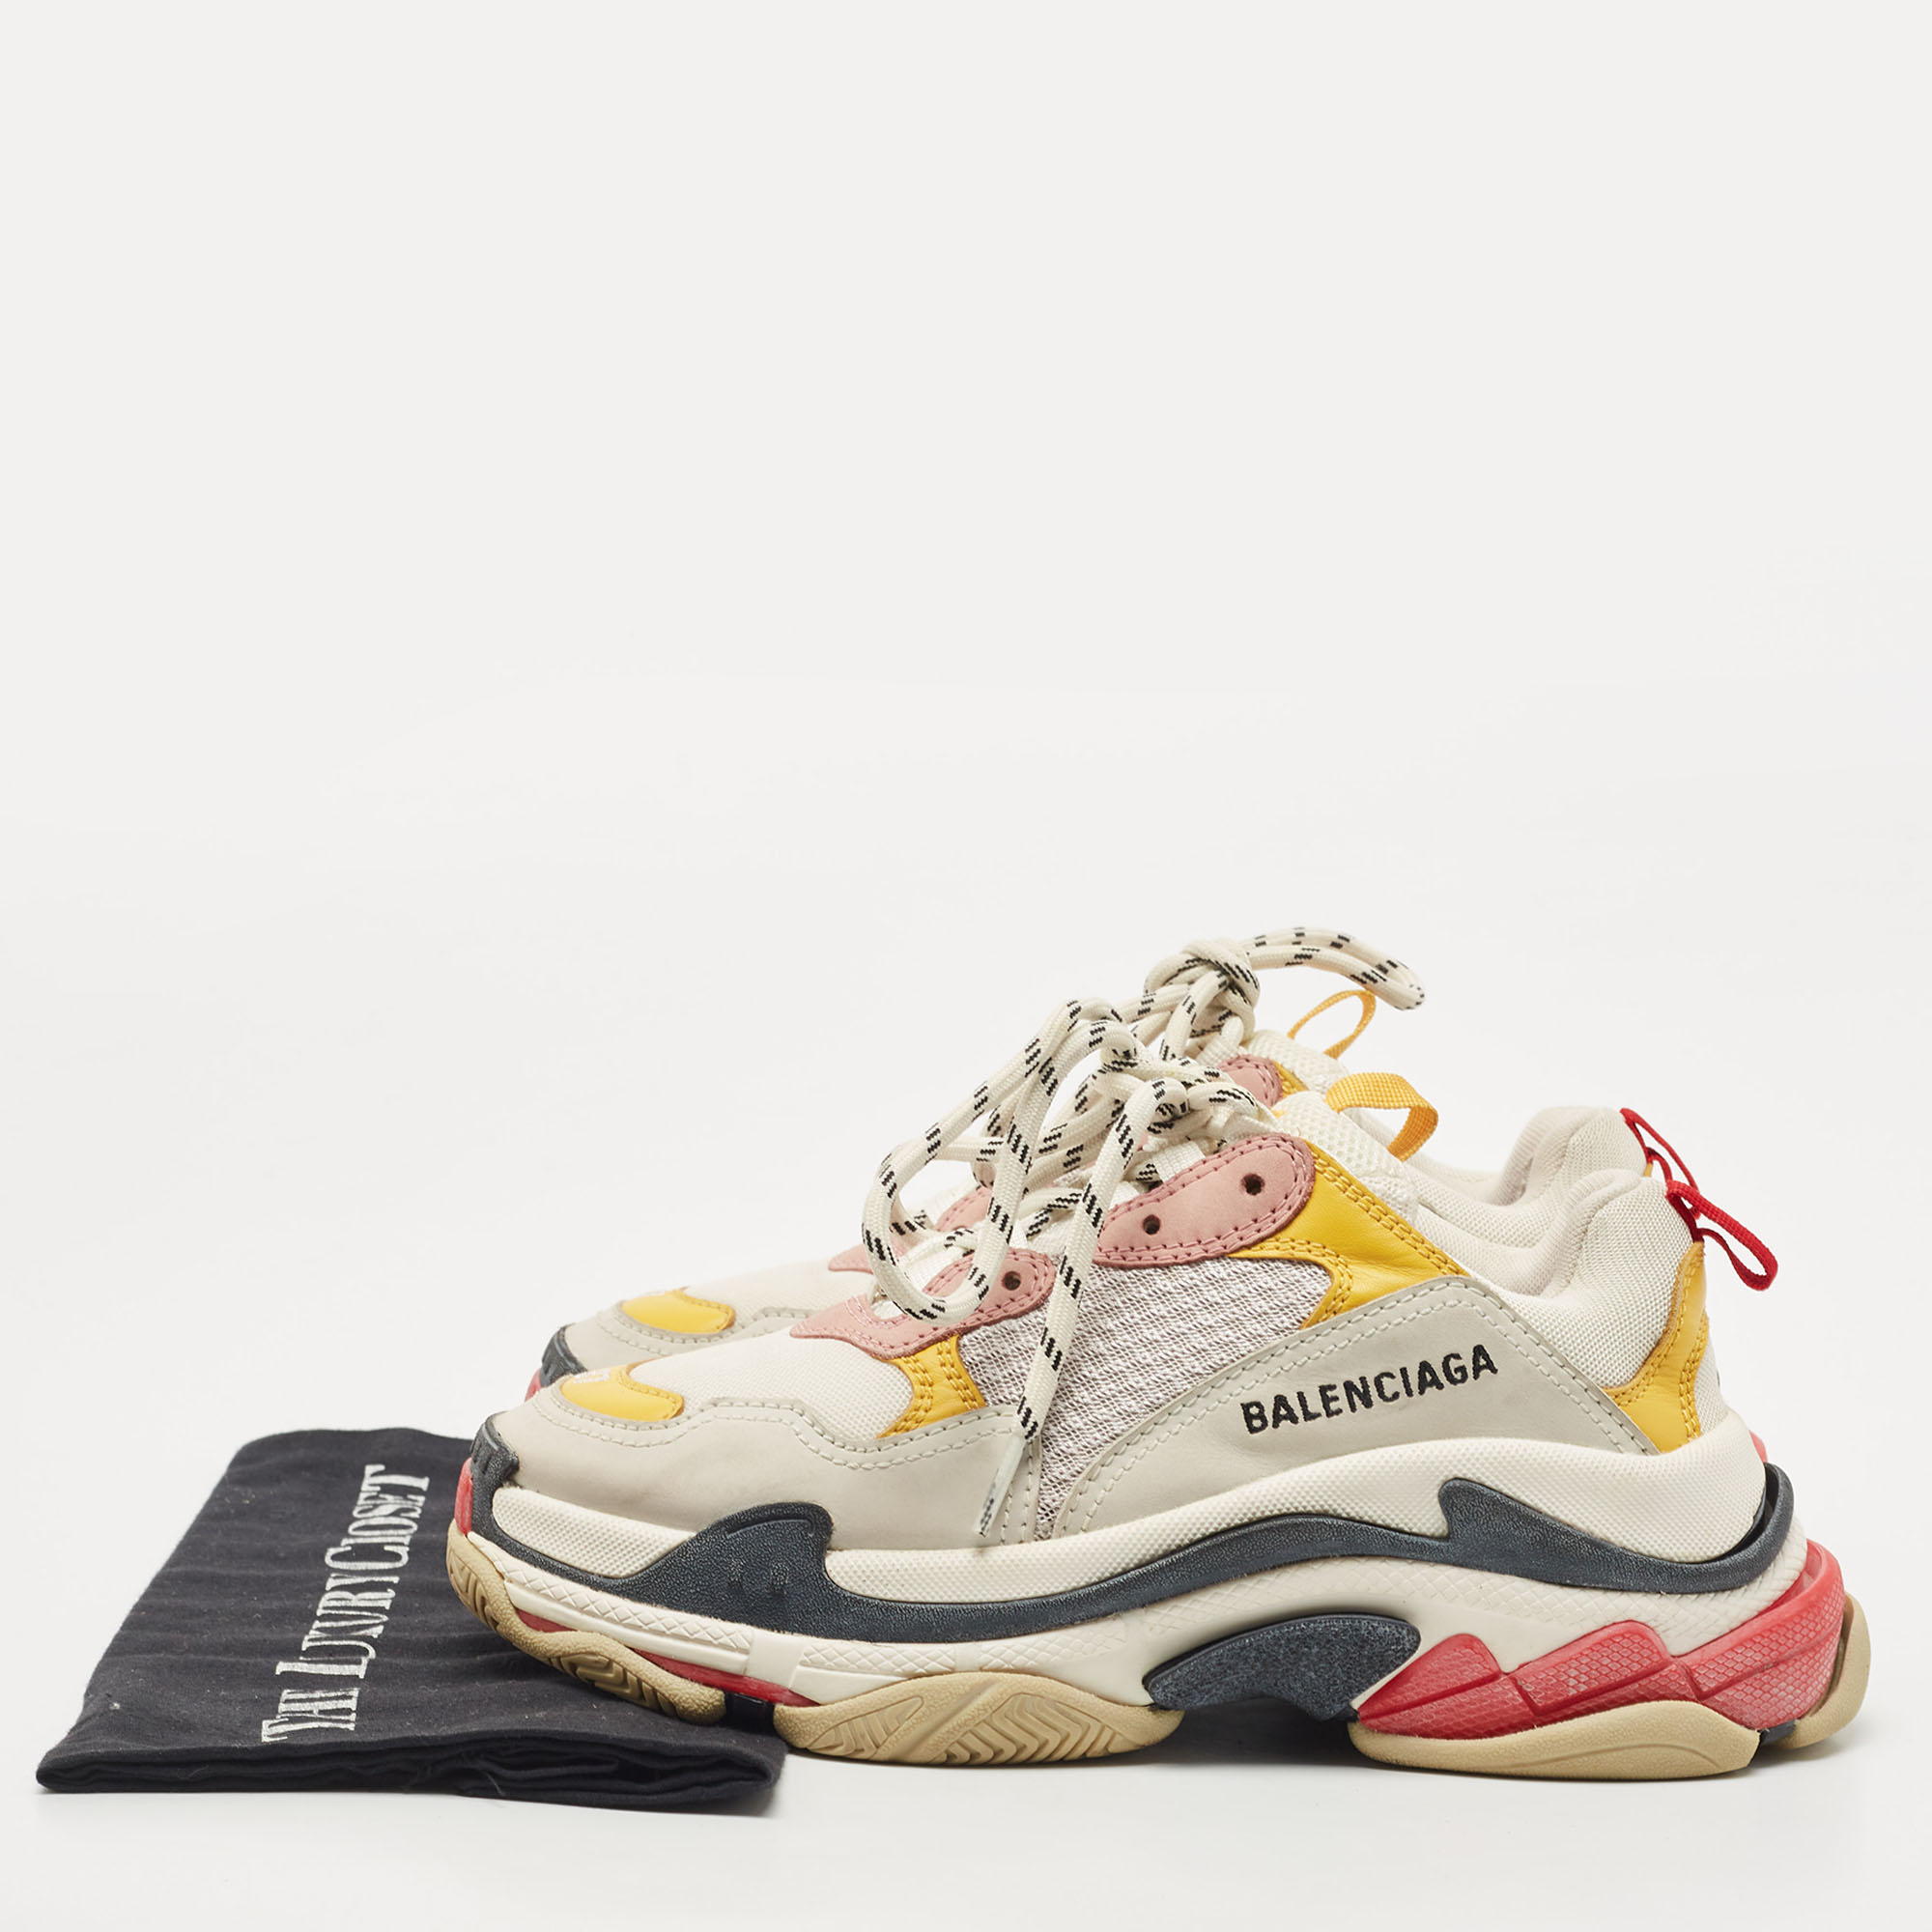 Balenciaga Tri Color Leather And Mesh Triple S Sneakers Size 37